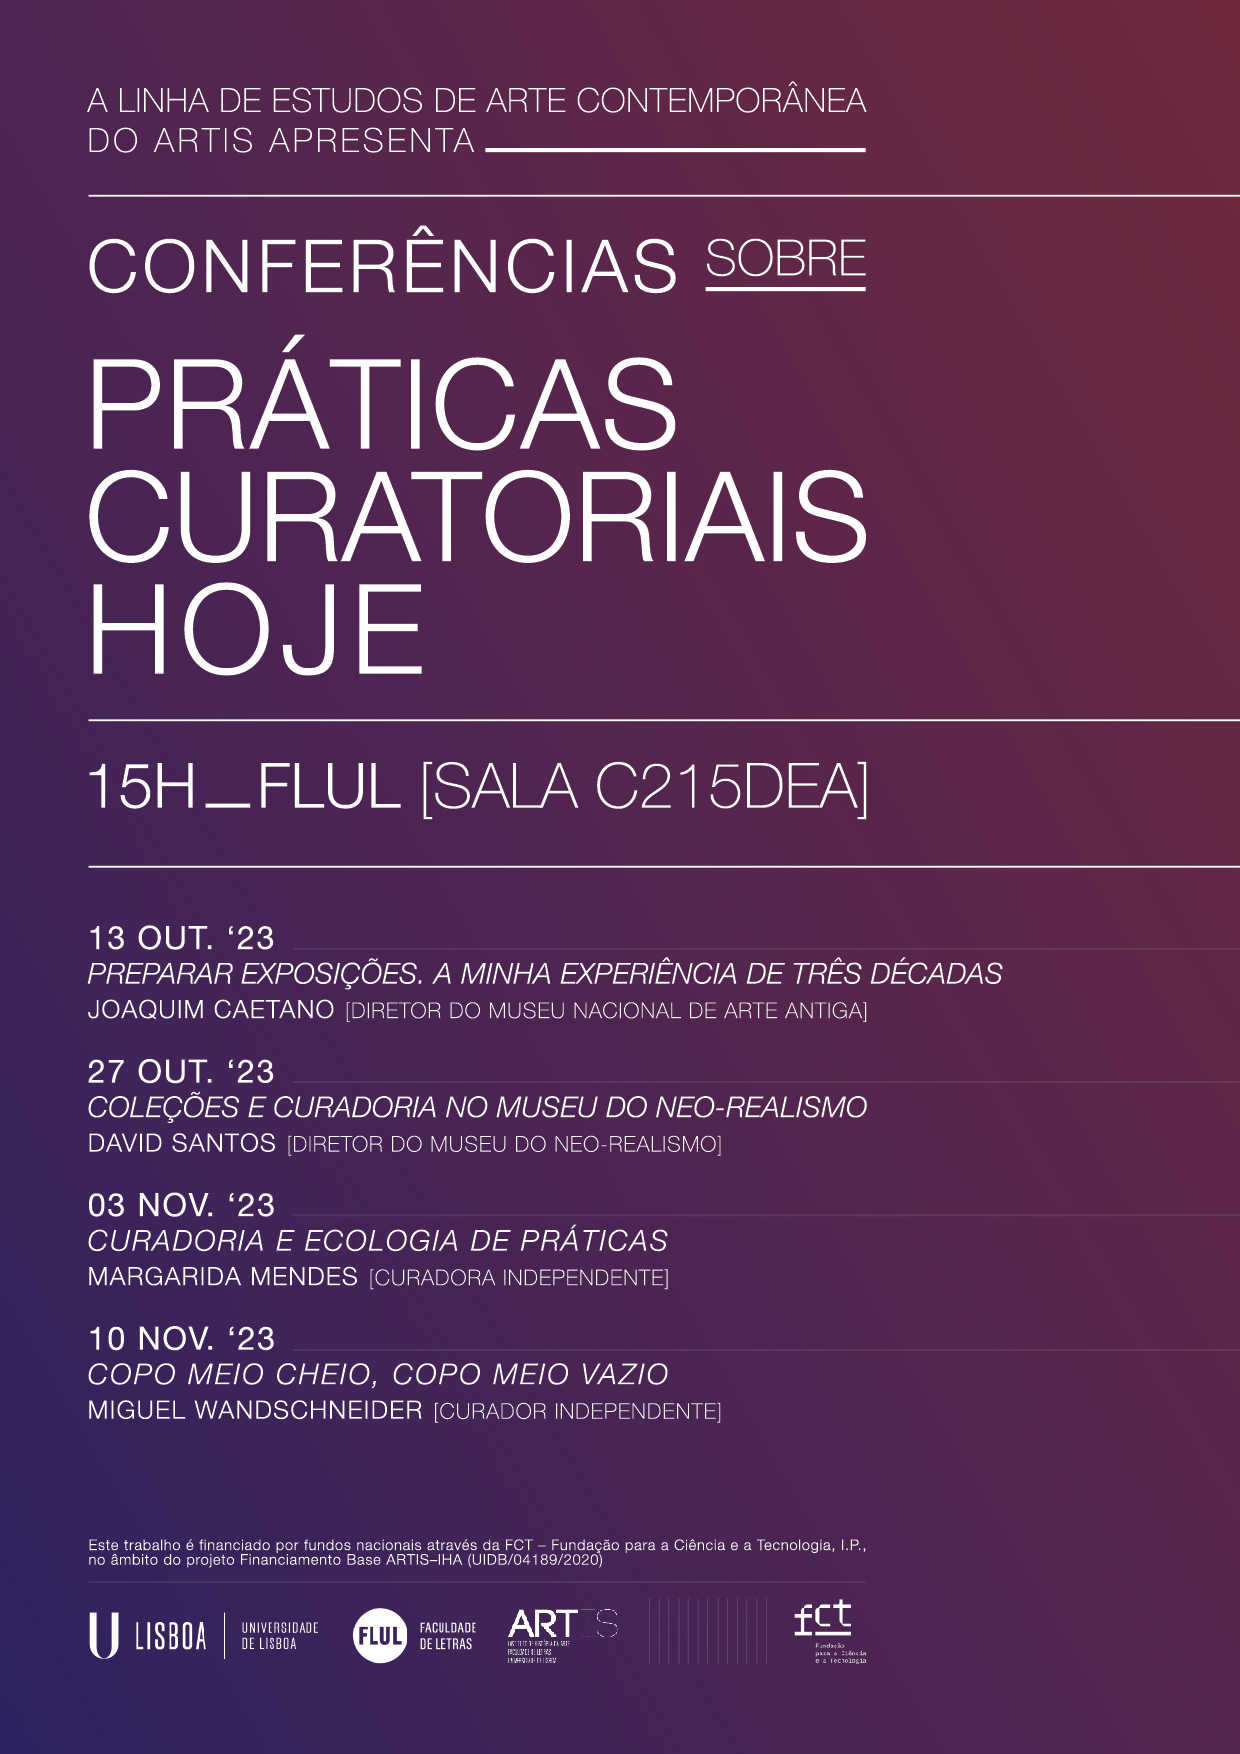 CONFERENCES ON CURATORIAL PRACTICES TODAY